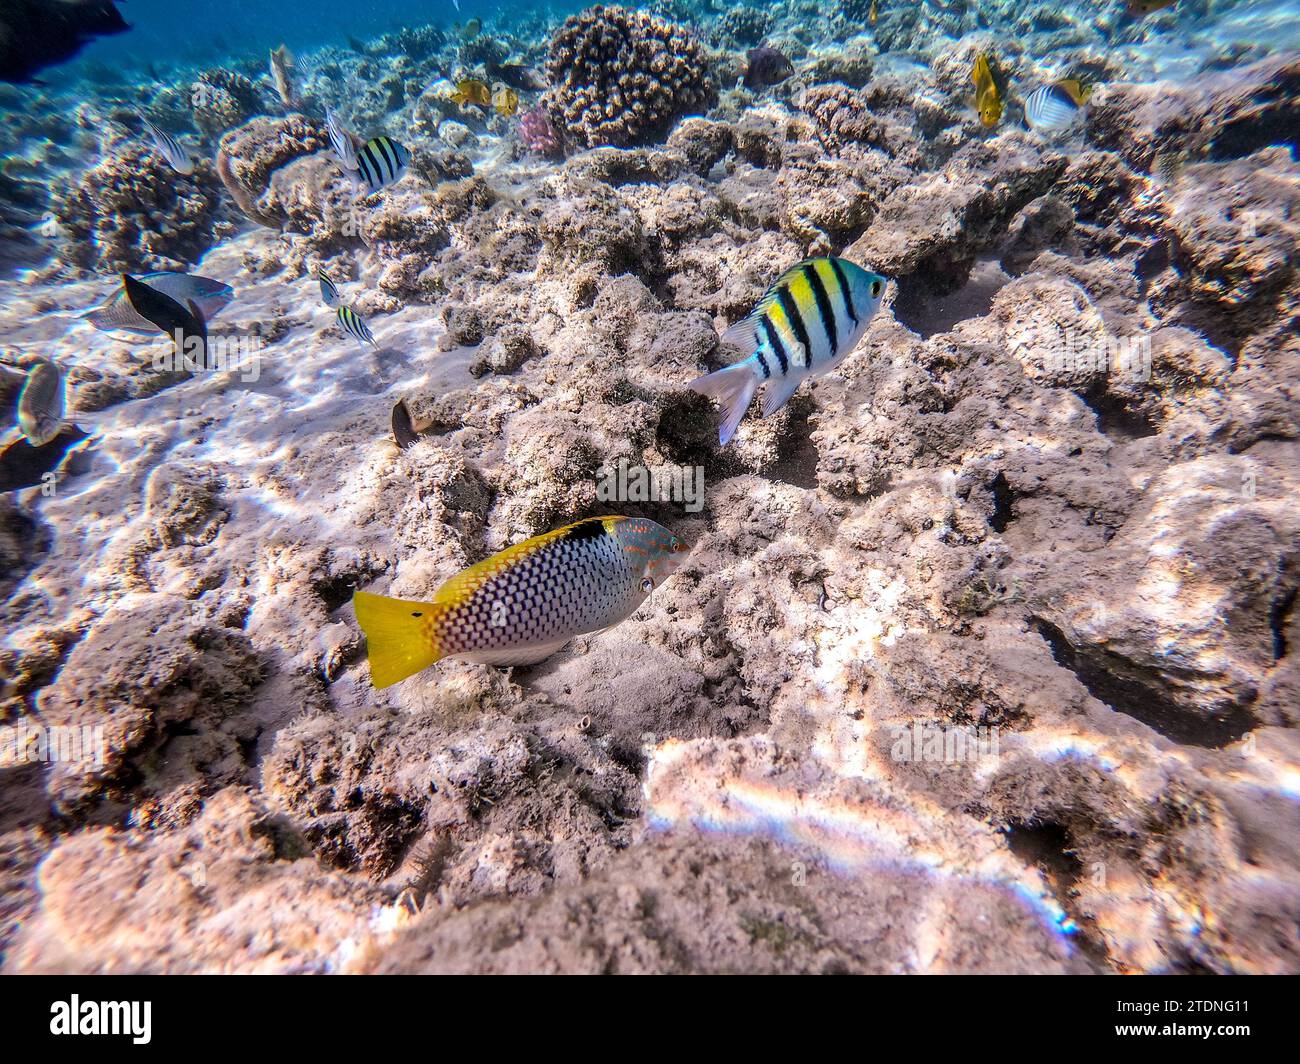 Tropical Checkerboard wrasse known as Halichoeres hortulanus underwater on sand sea bottom at the coral reef. Underwater life of reef with corals an Stock Photo